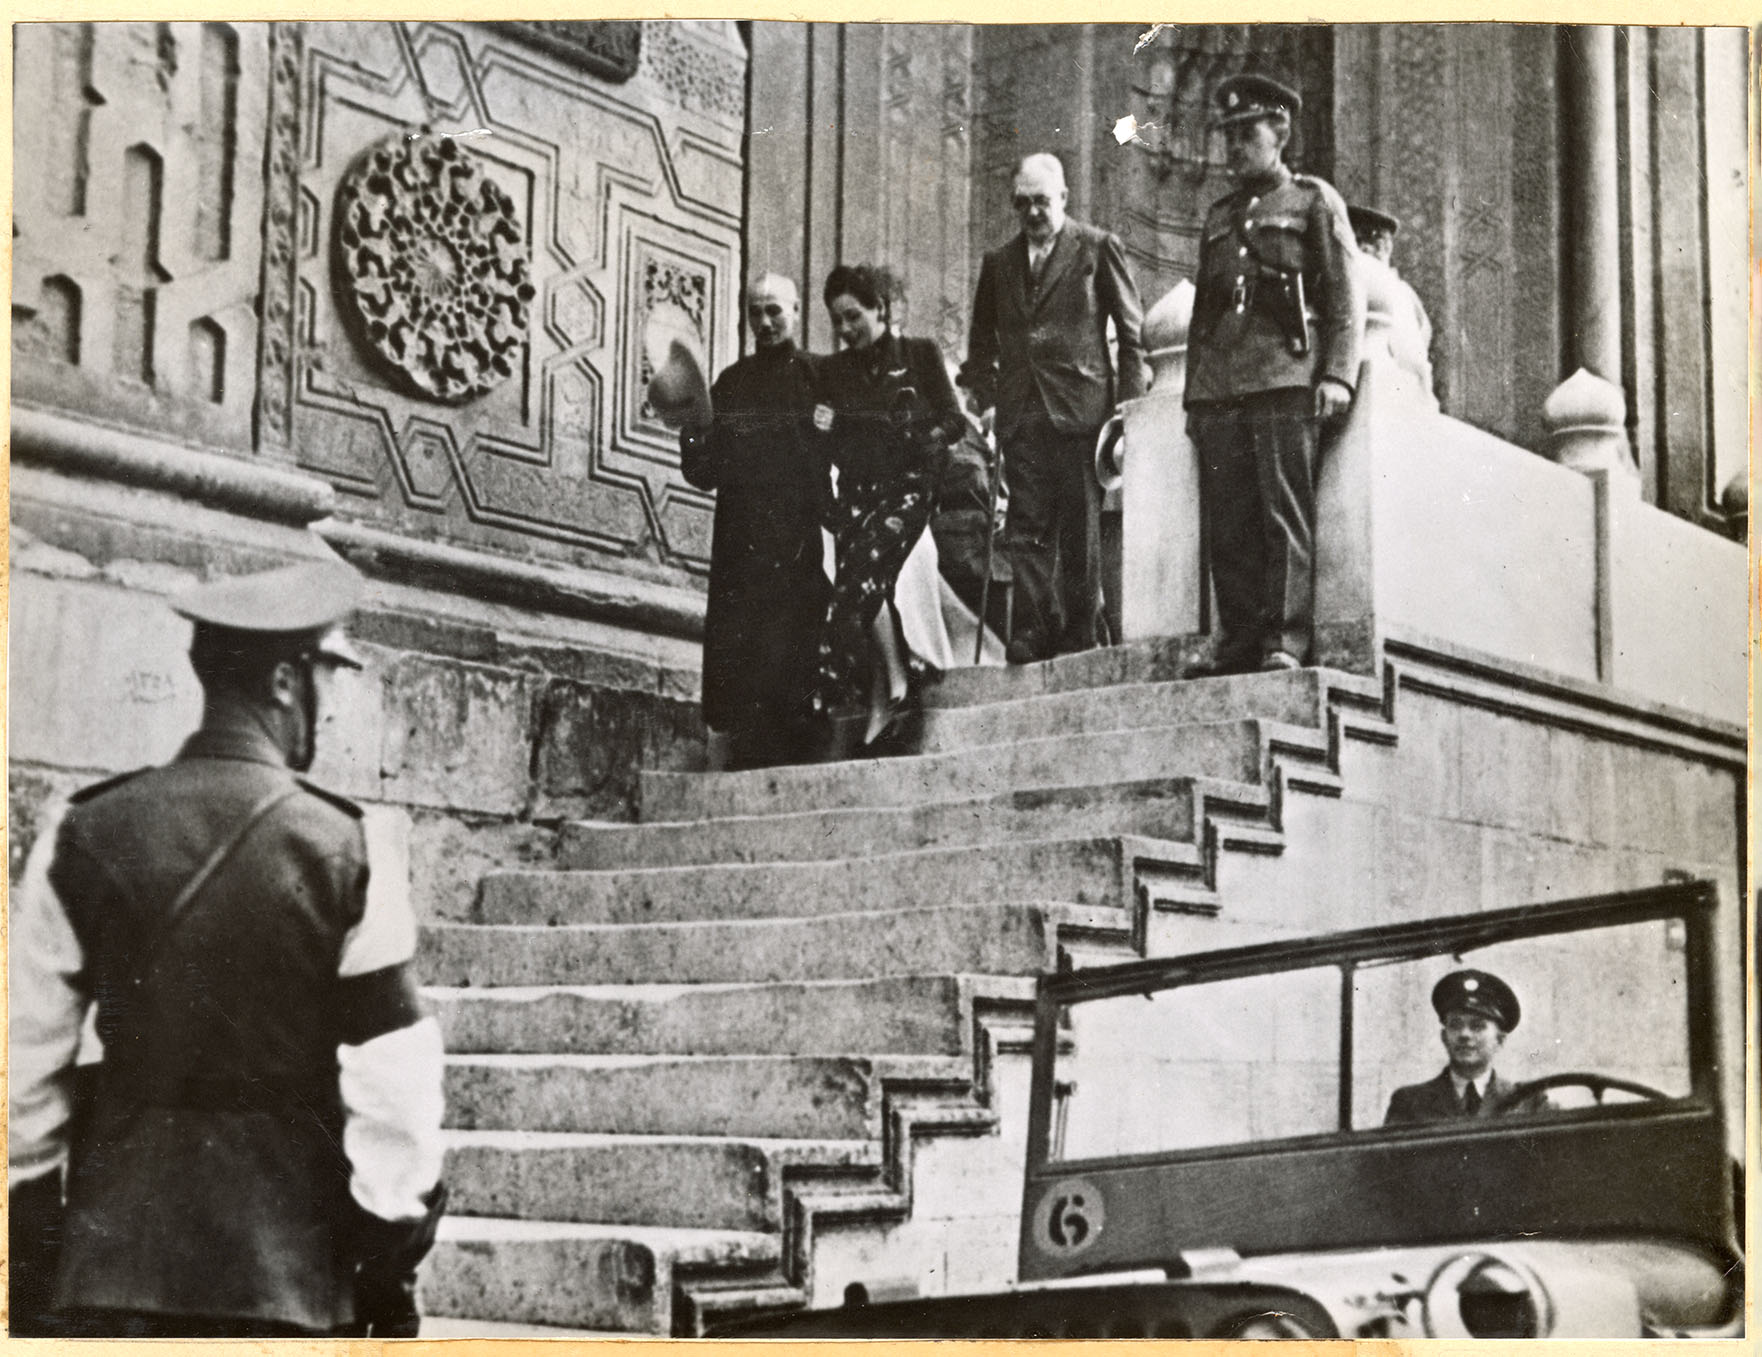 Chiang Kai Shek and his wife descend a staircase while other officers wait